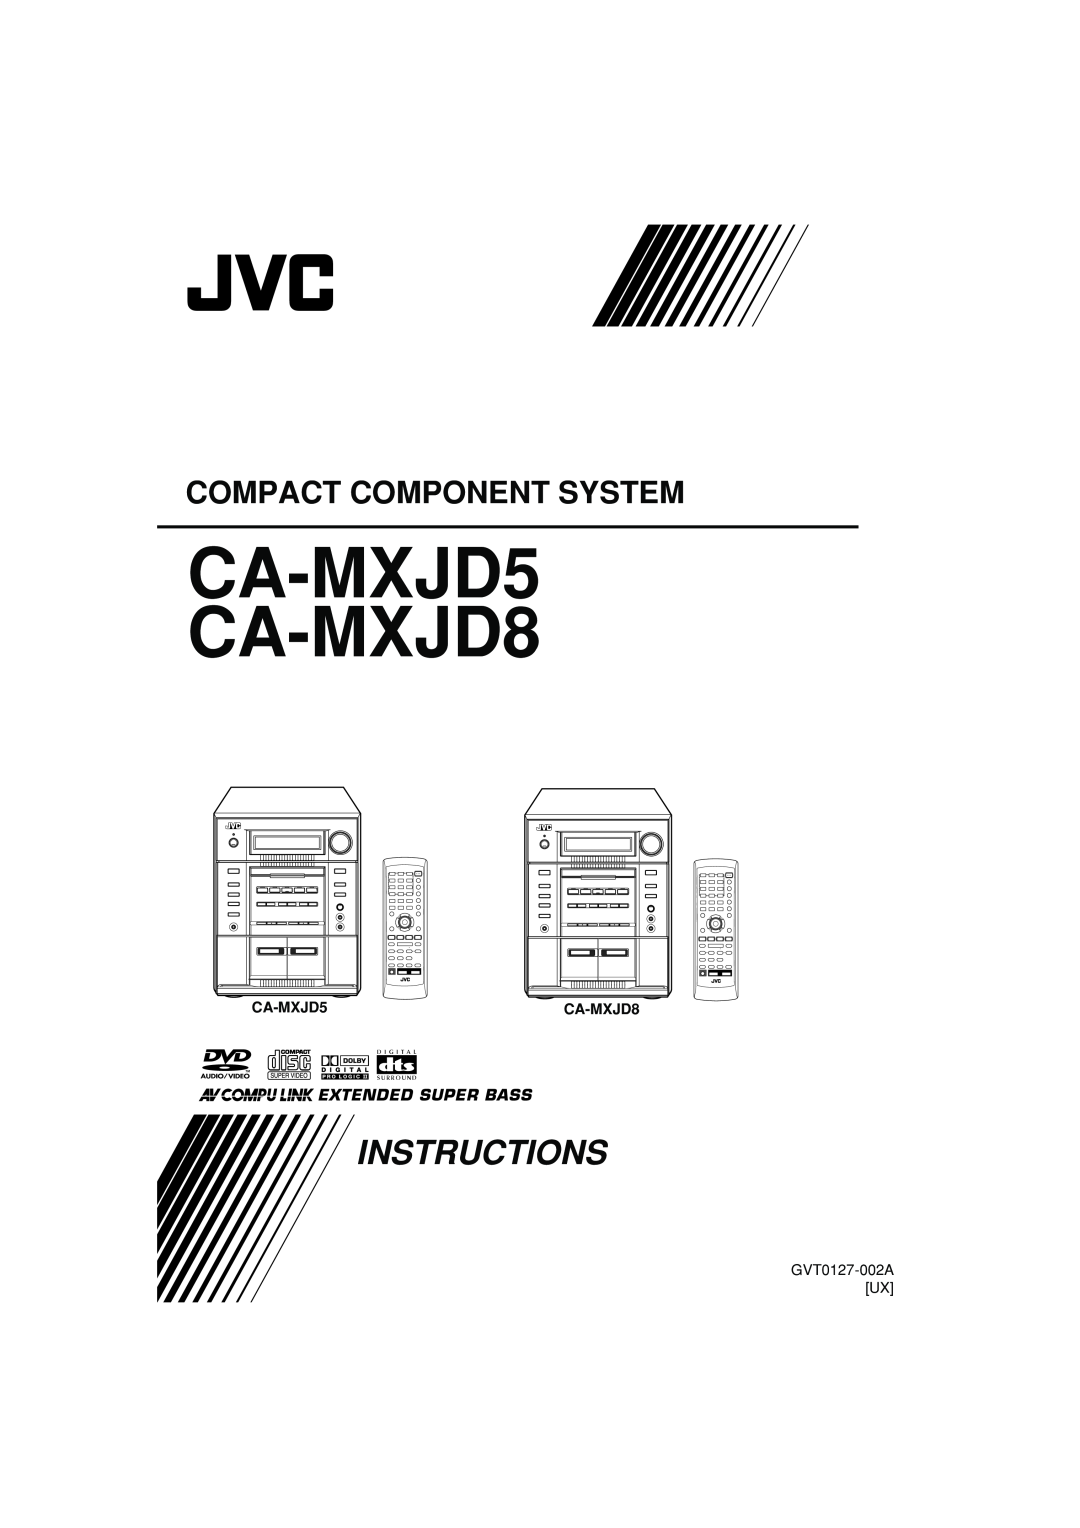 JVC manual CA-MXJD5 CA-MXJD8, Instructions, Compact Component System, Extended Super Bass, GVT0127-002AUX 